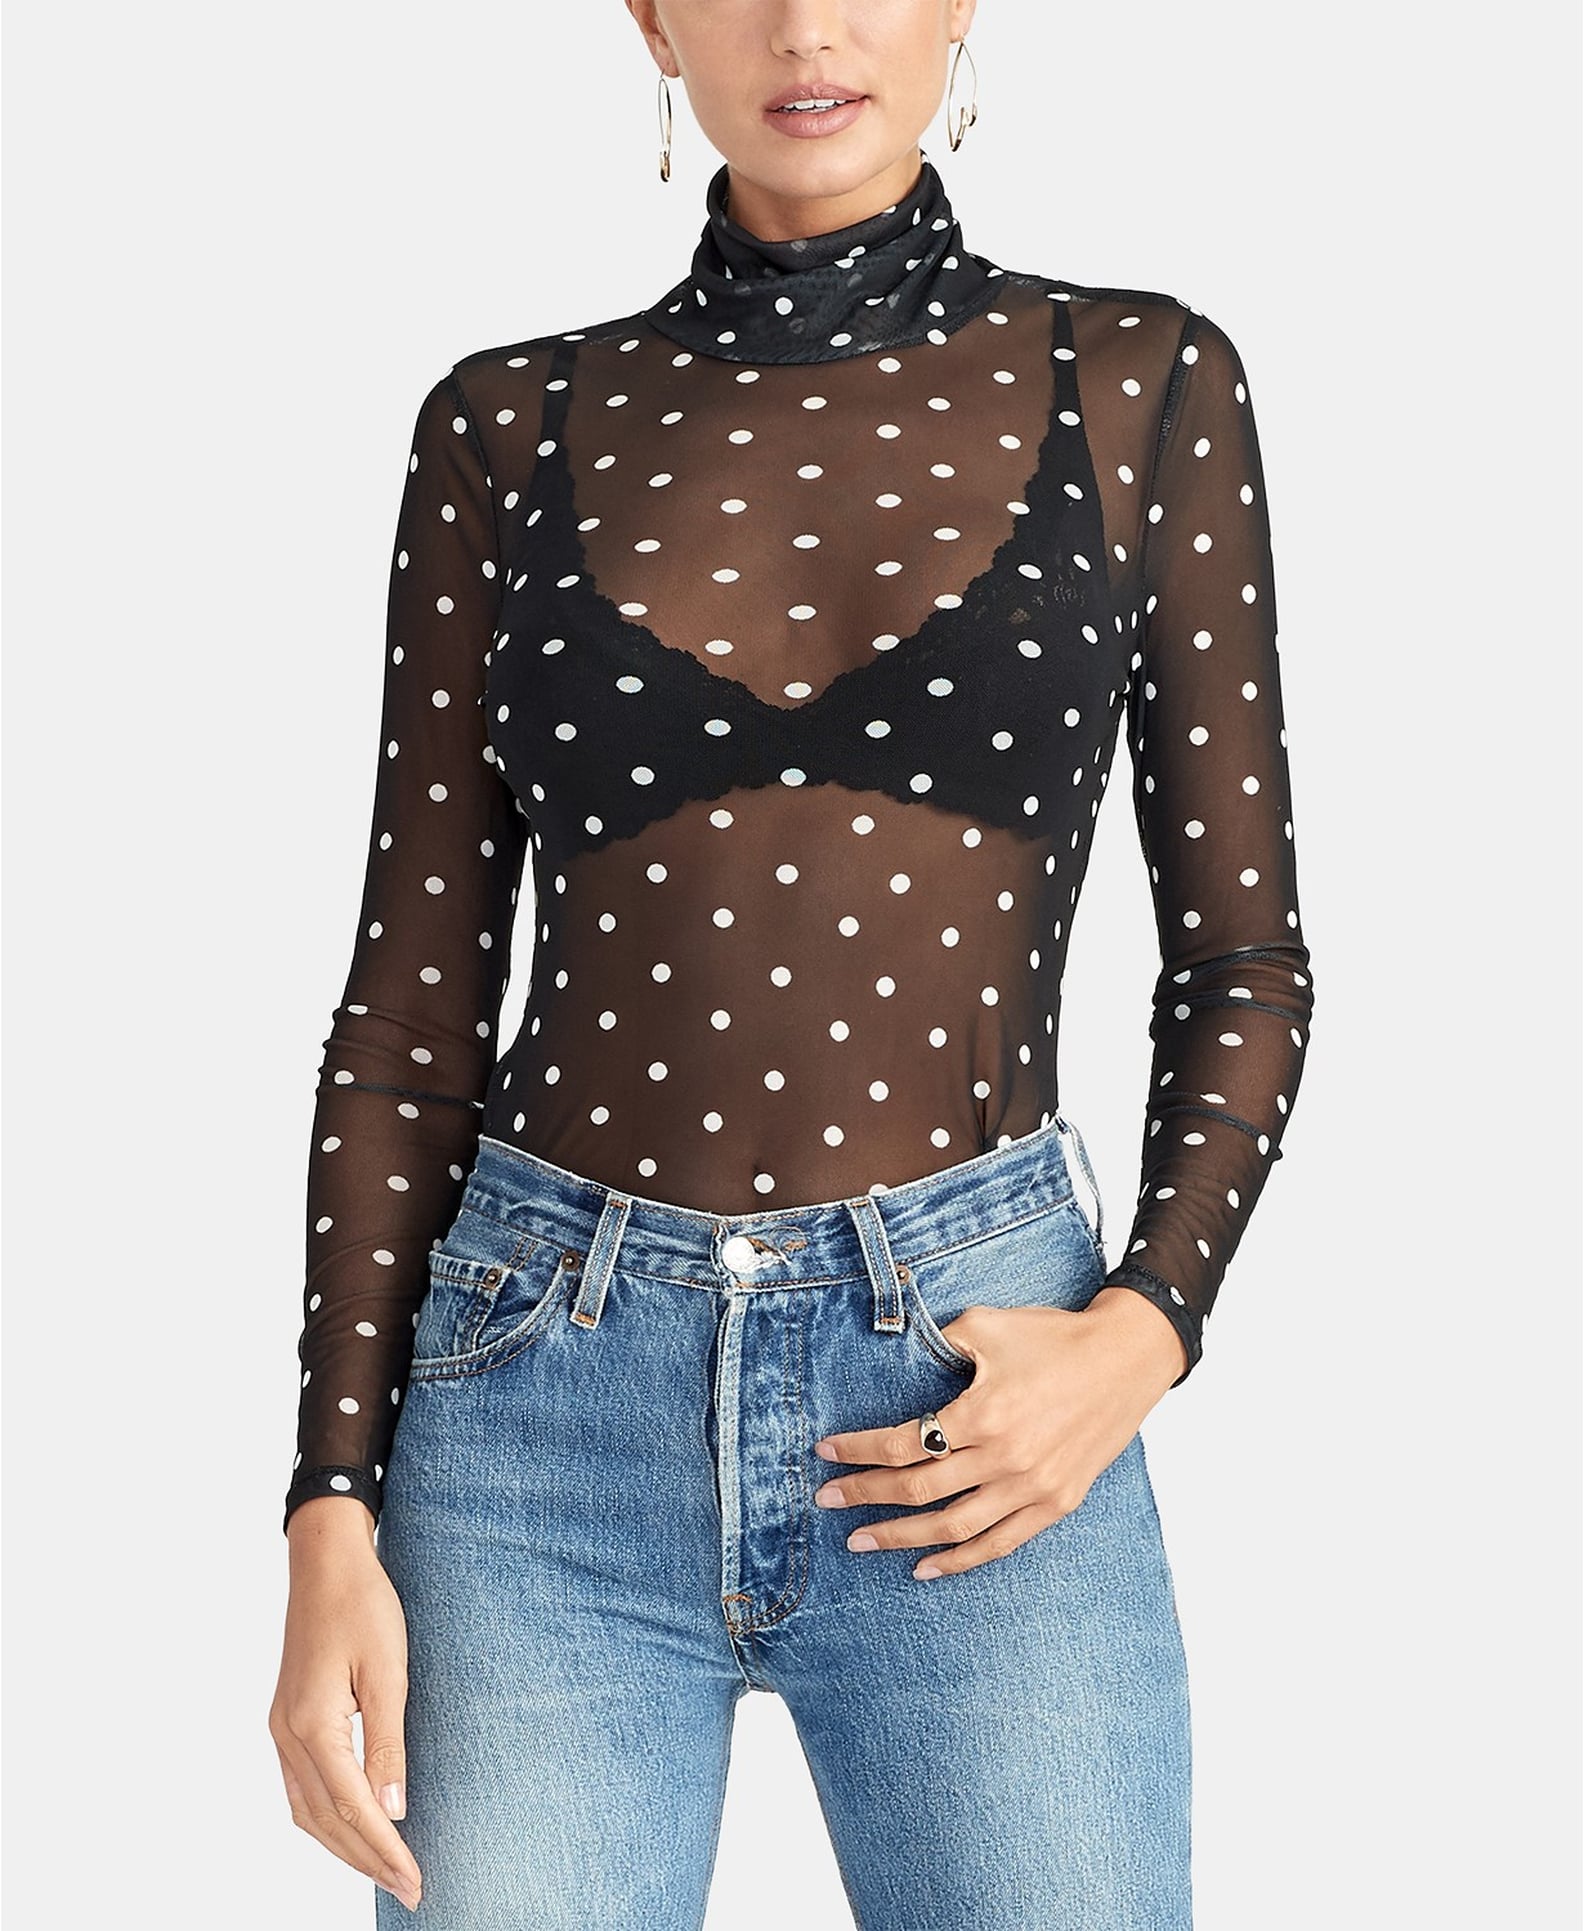 The Best Macy's Clothes and Fashion Under $50 | POPSUGAR Fashion